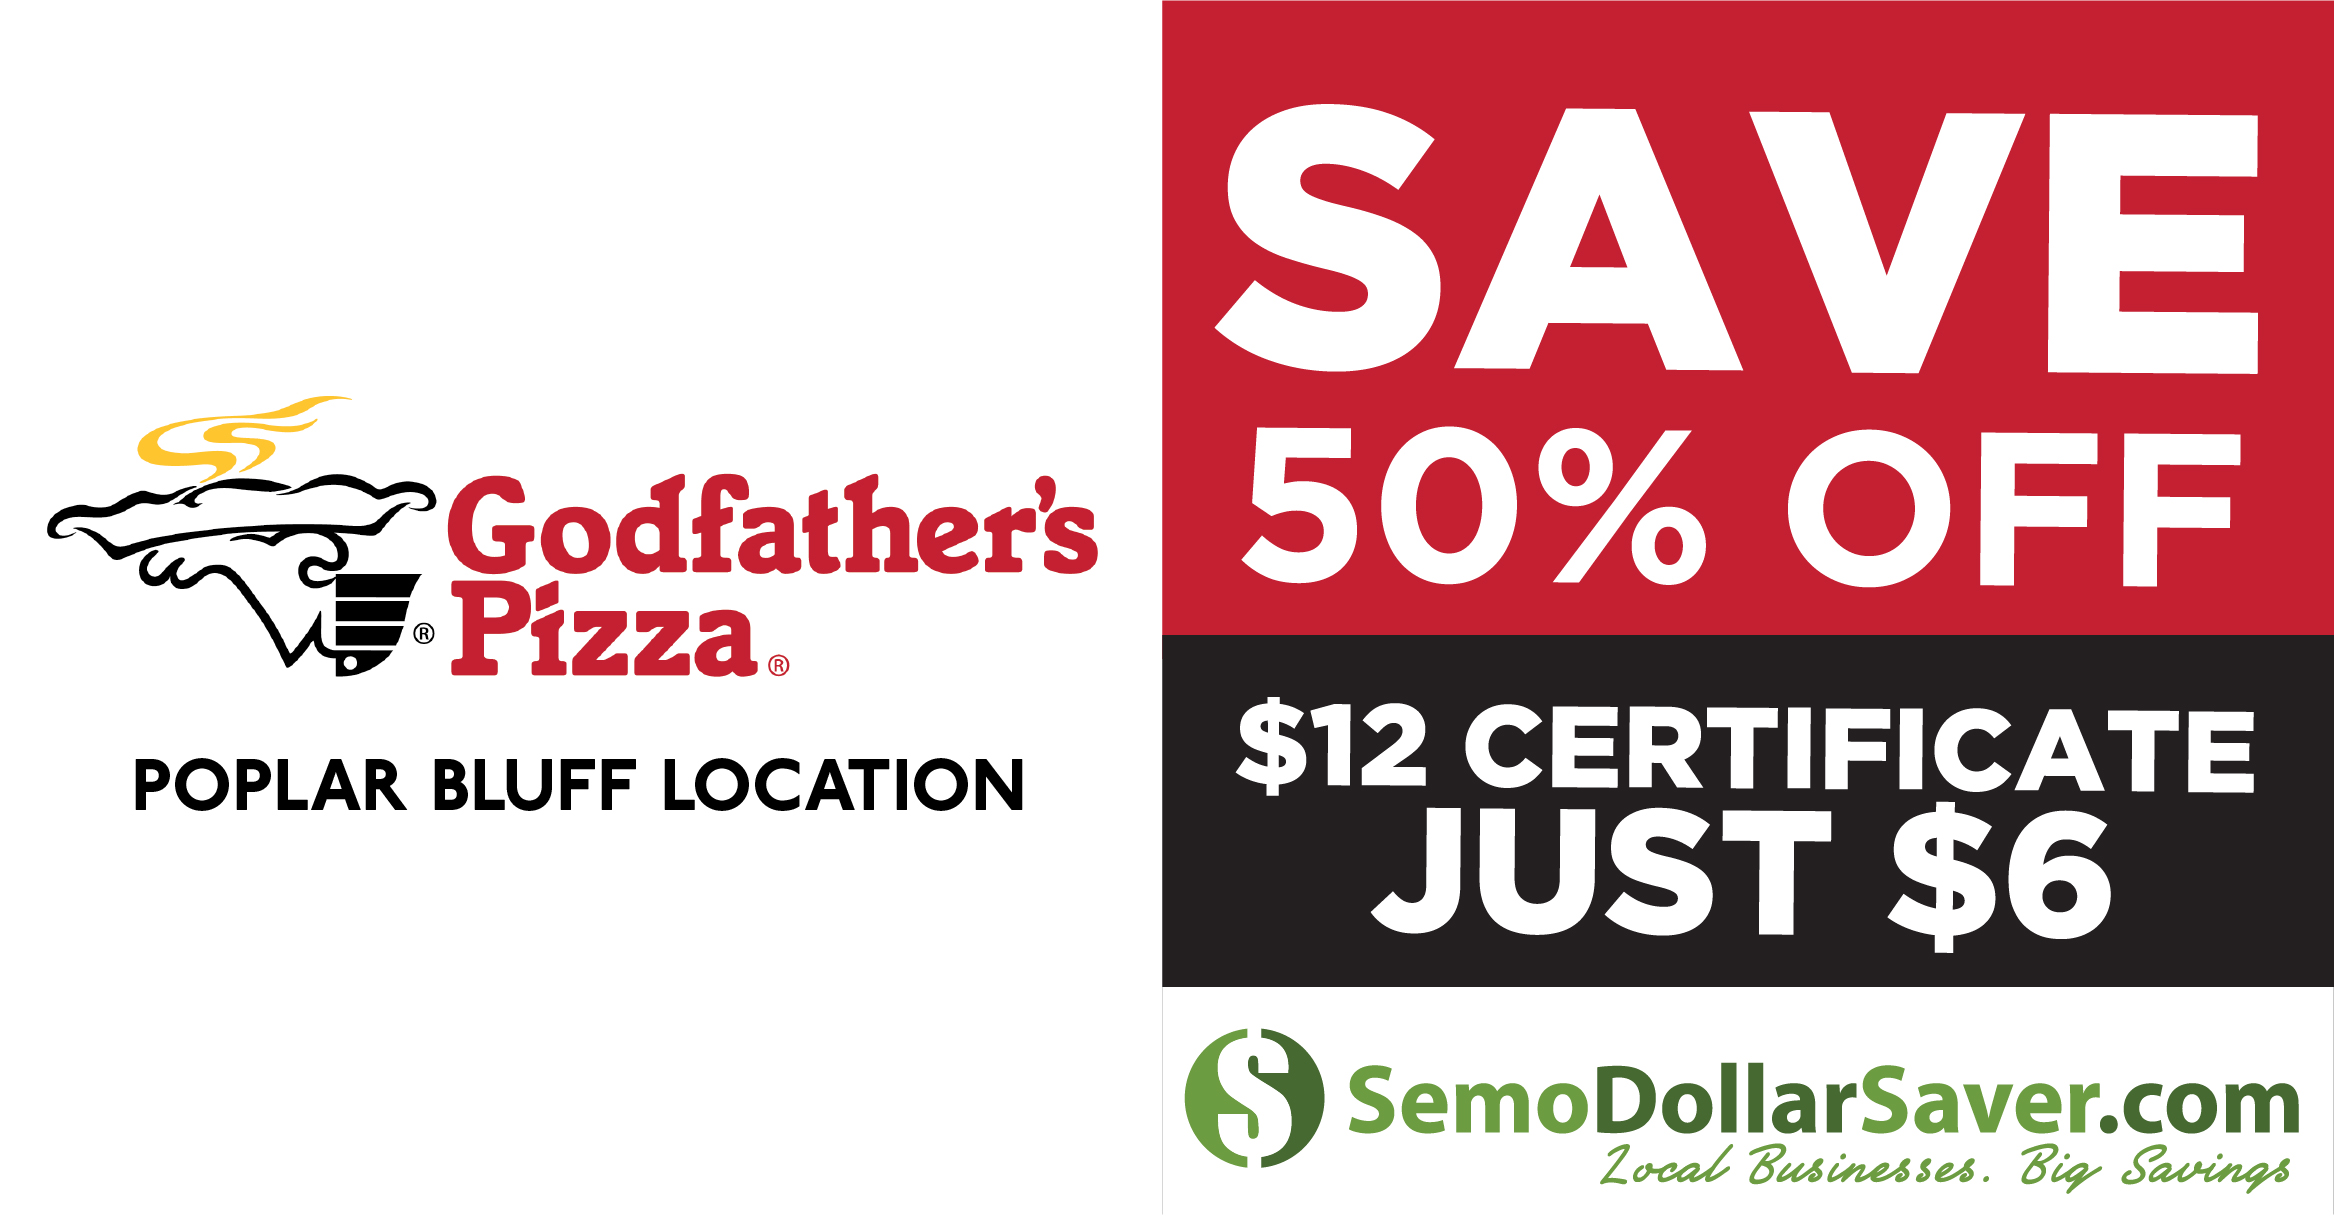 One Lunch or Dinner Buffet at Godfather’s Pizza